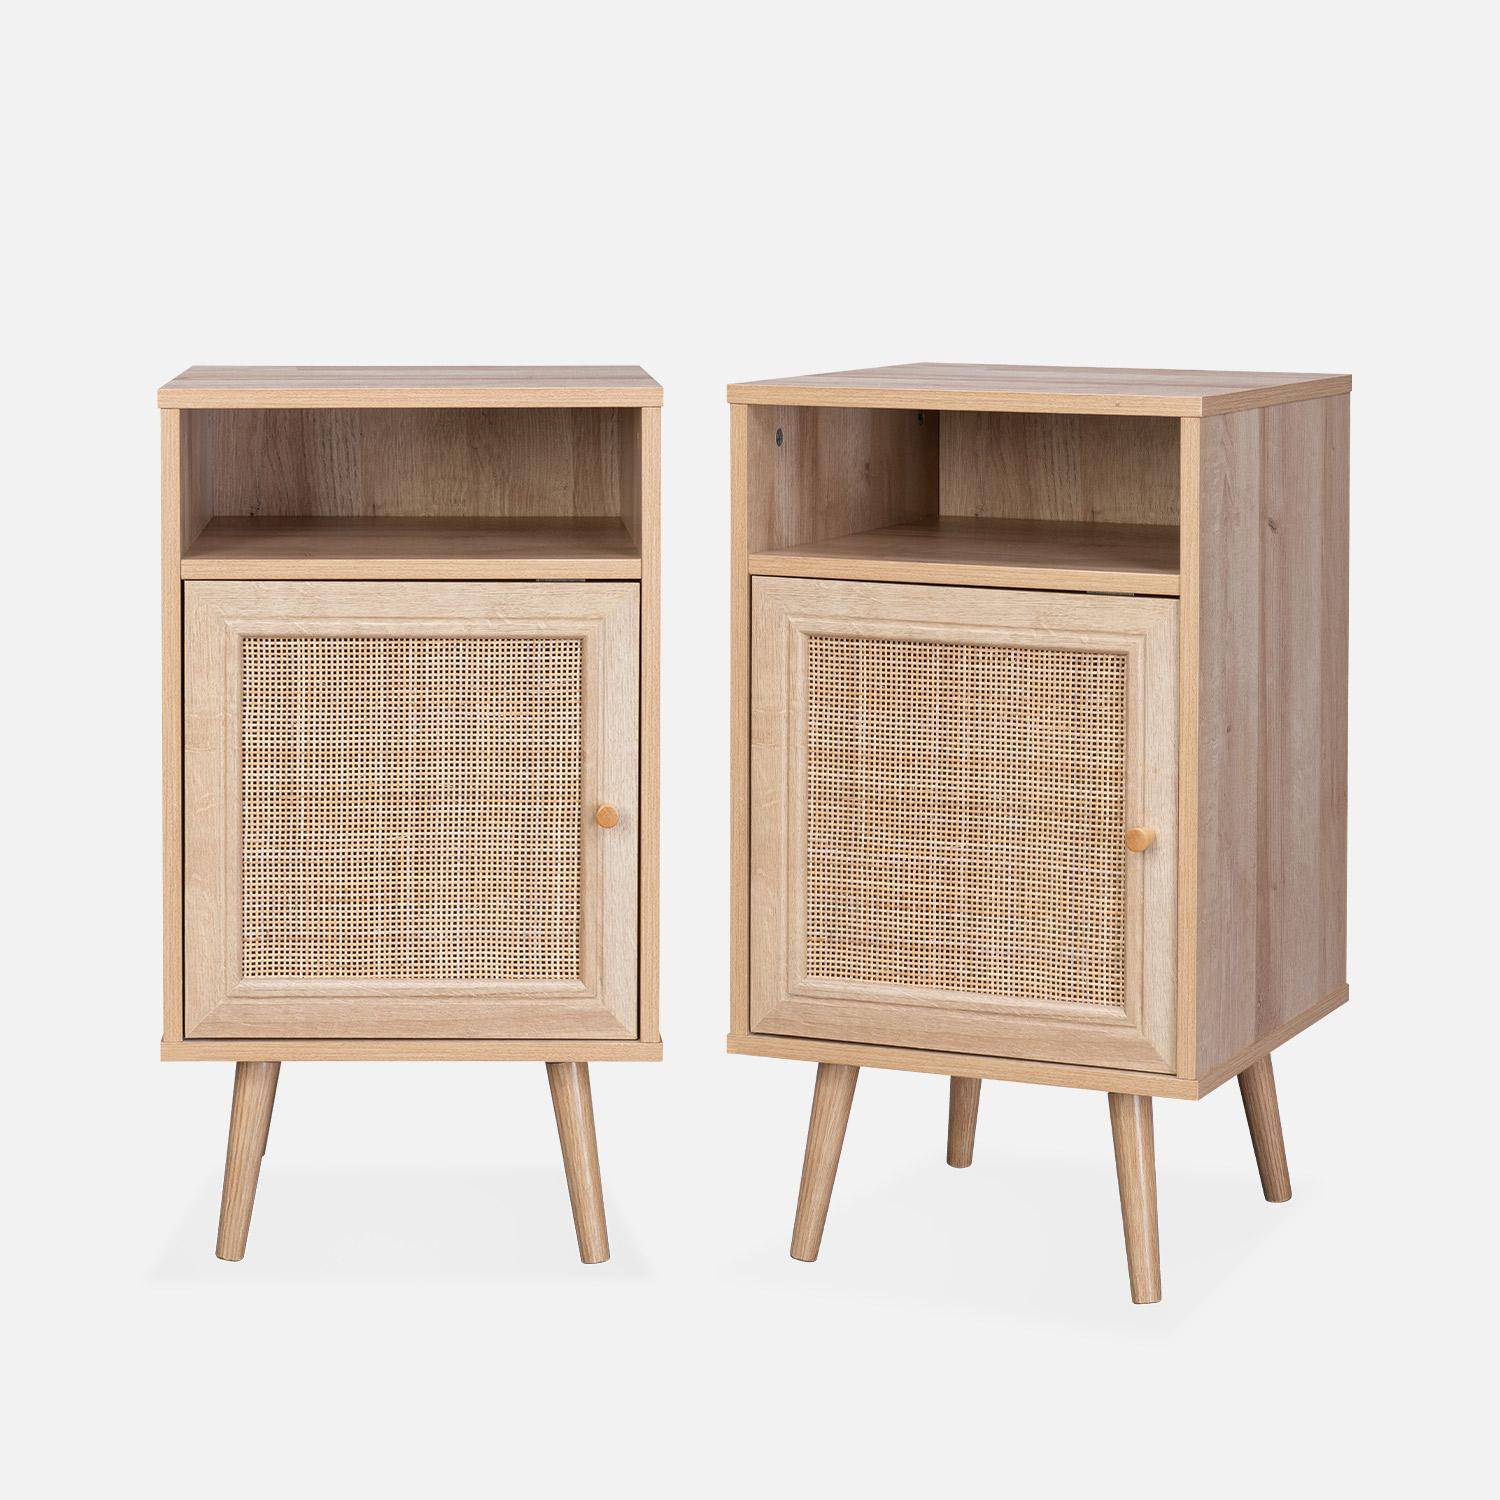 Pair of Scandi-style wood and cane rattan bedside tables with cupboard, 40x39x70cm - Boheme - Natural Wood colour,sweeek,Photo4